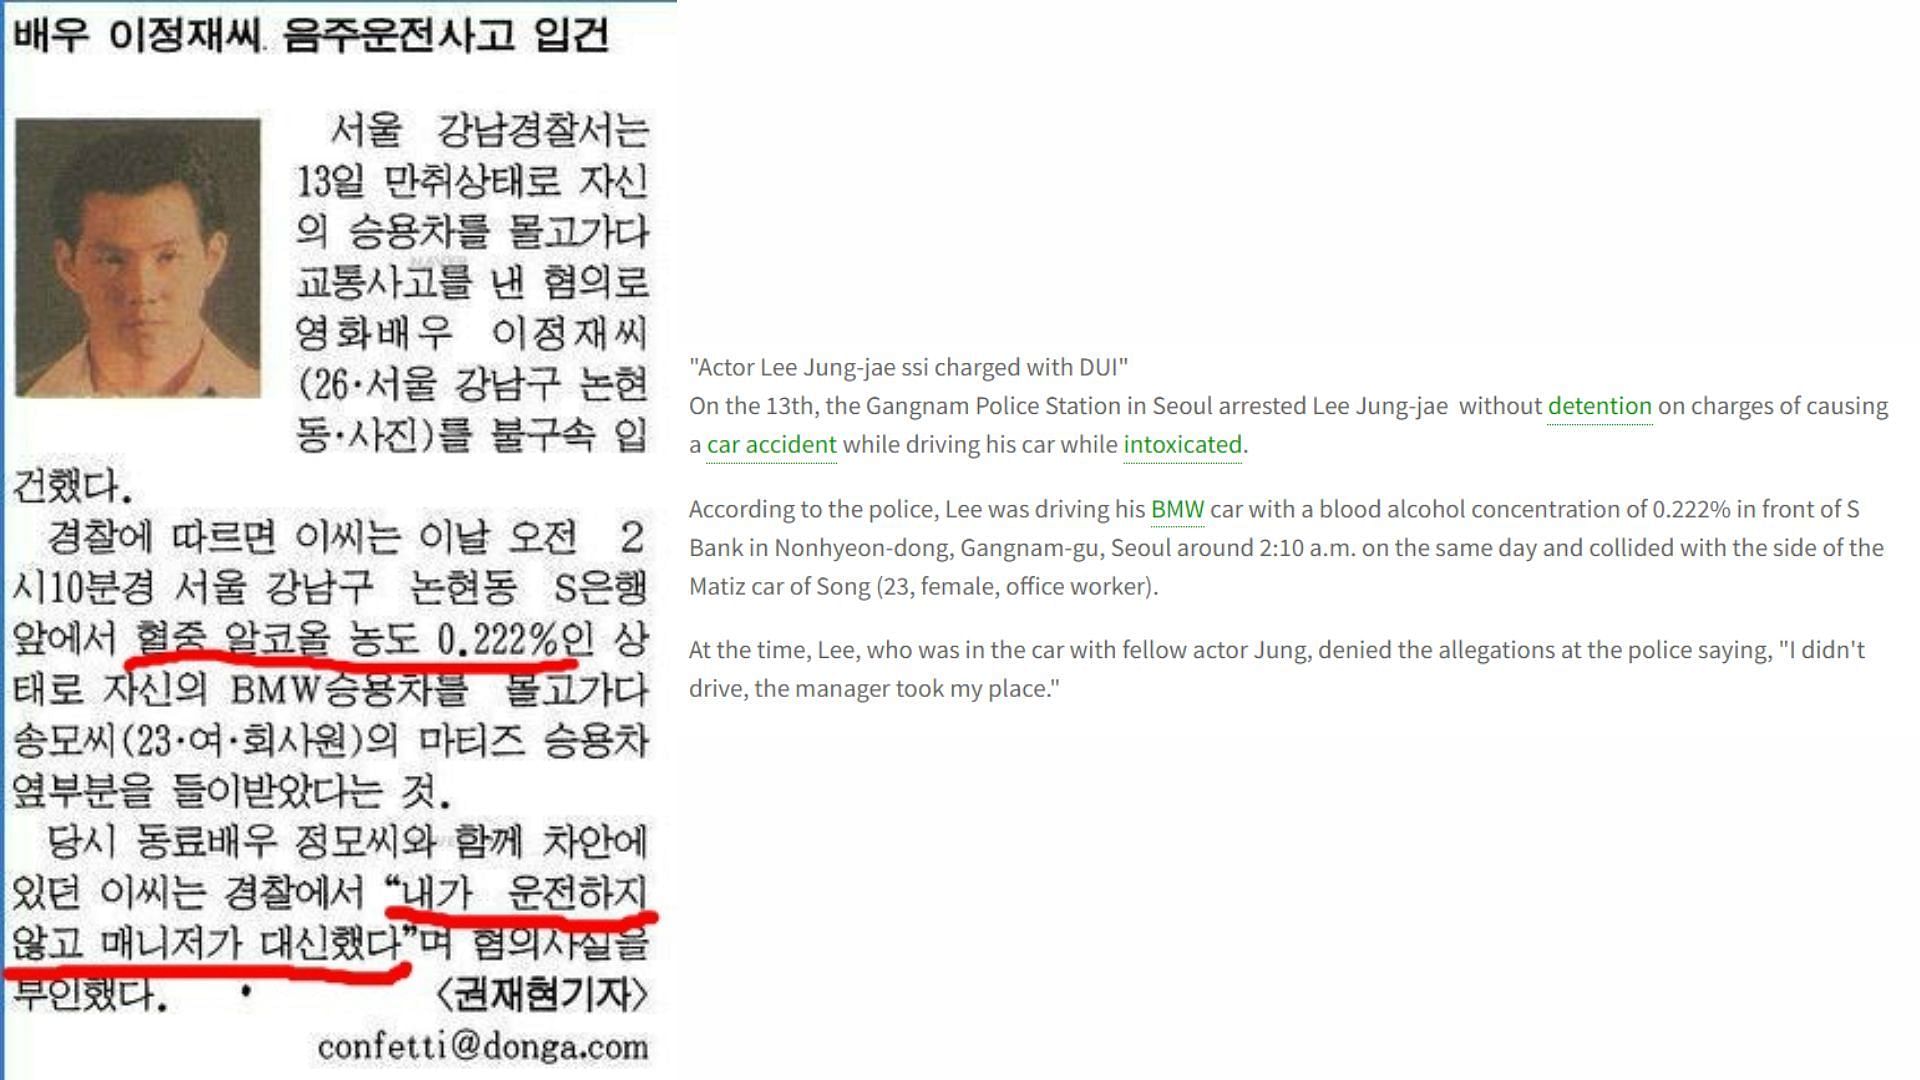 Newspaper clipping of one of the DUI cases with translation (Images via Instiz and pannchoa)